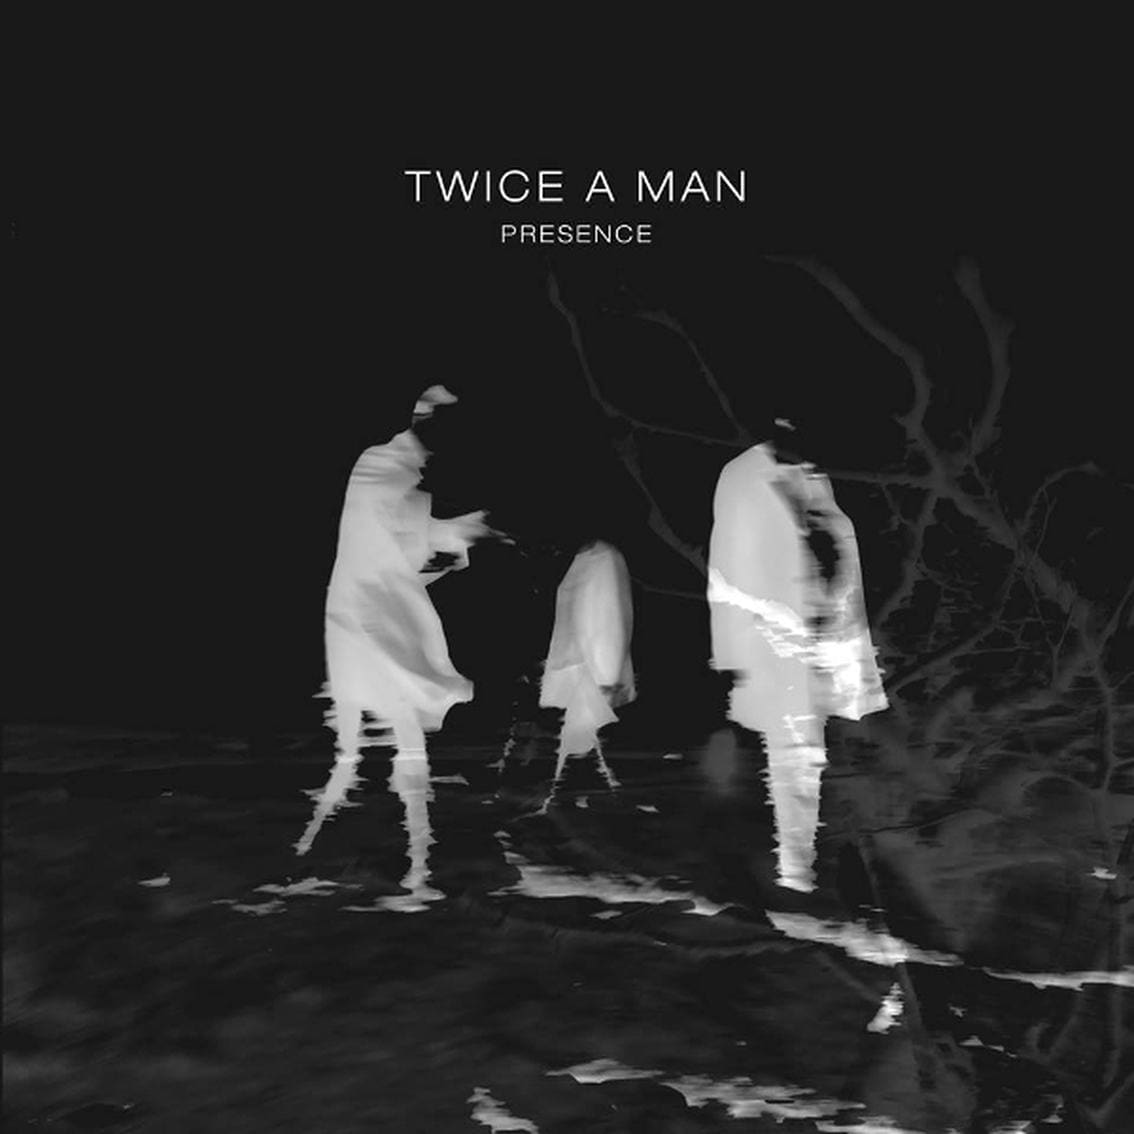 Swedish cult act Twice a Man returns with 'Presence' on vinyl & CD - order your copy now, limited edition only